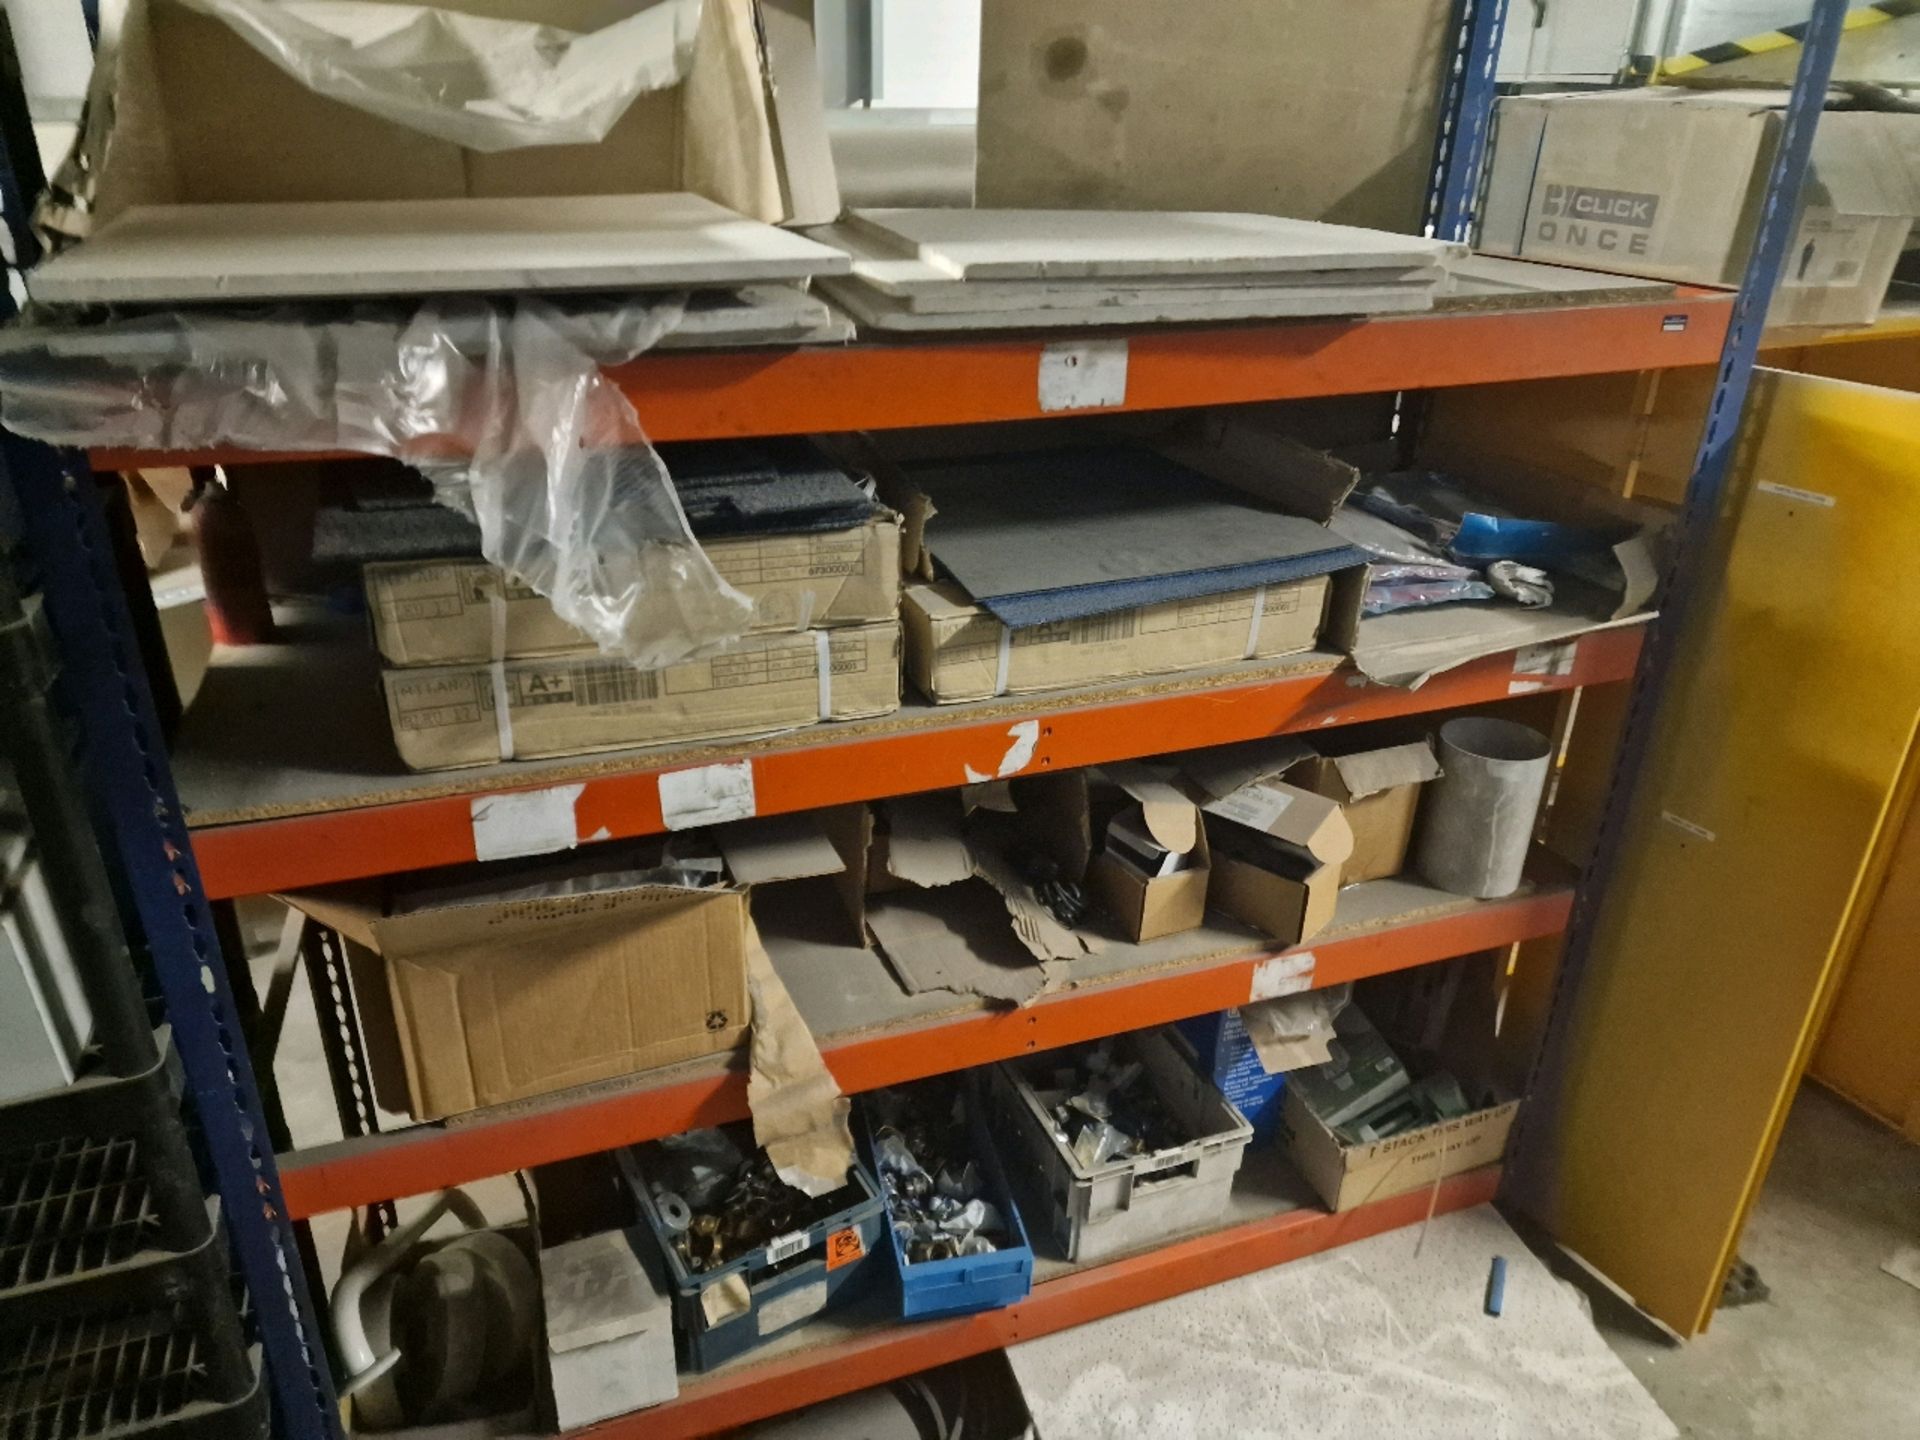 Contents Of Maintenance Room - Image 10 of 10